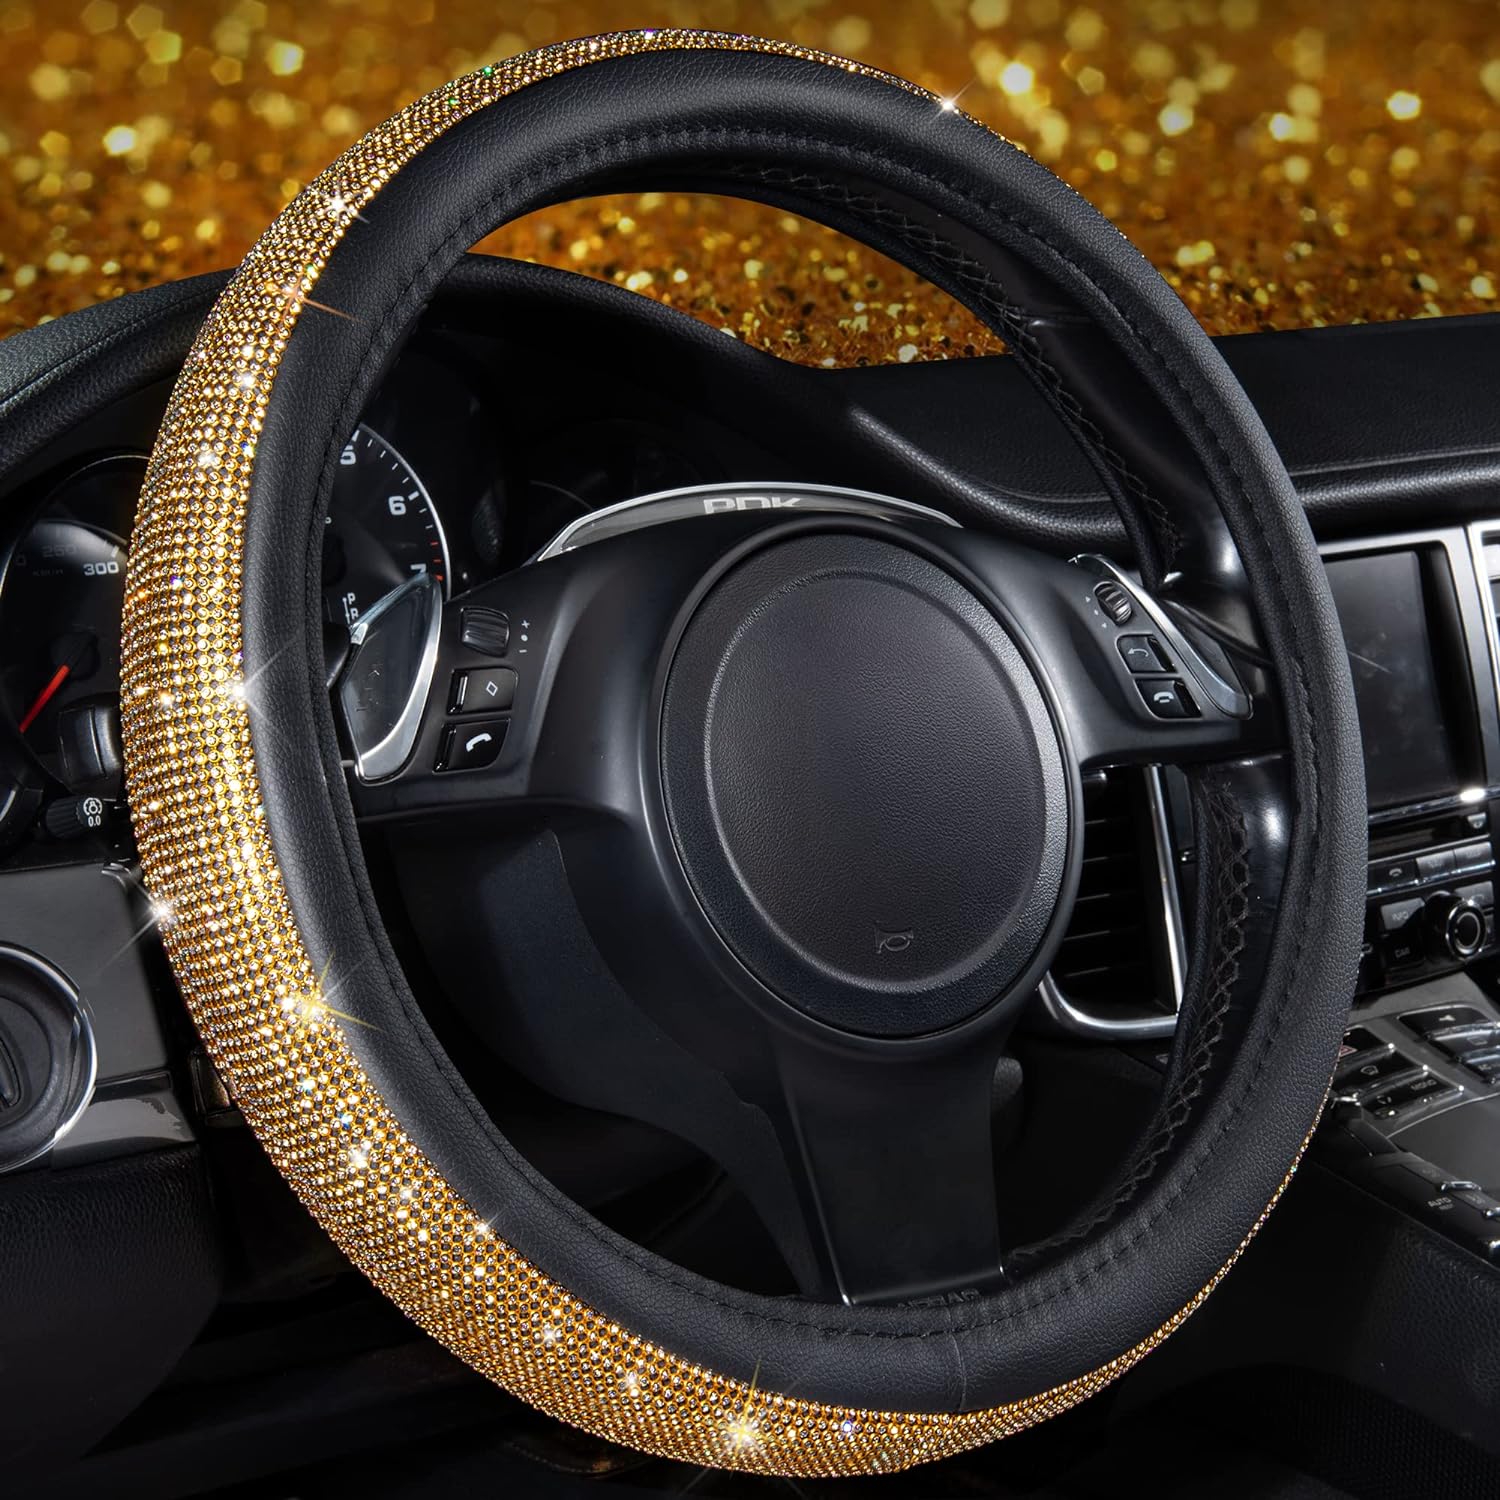 CAR PASS Diamond Car Floor Mats & Leather Steering Wheel Cover, with Bling Crystal Rhinestones Universal Fit 14" 1/2-15" Crystal Glitter for Women Sparkle Girl